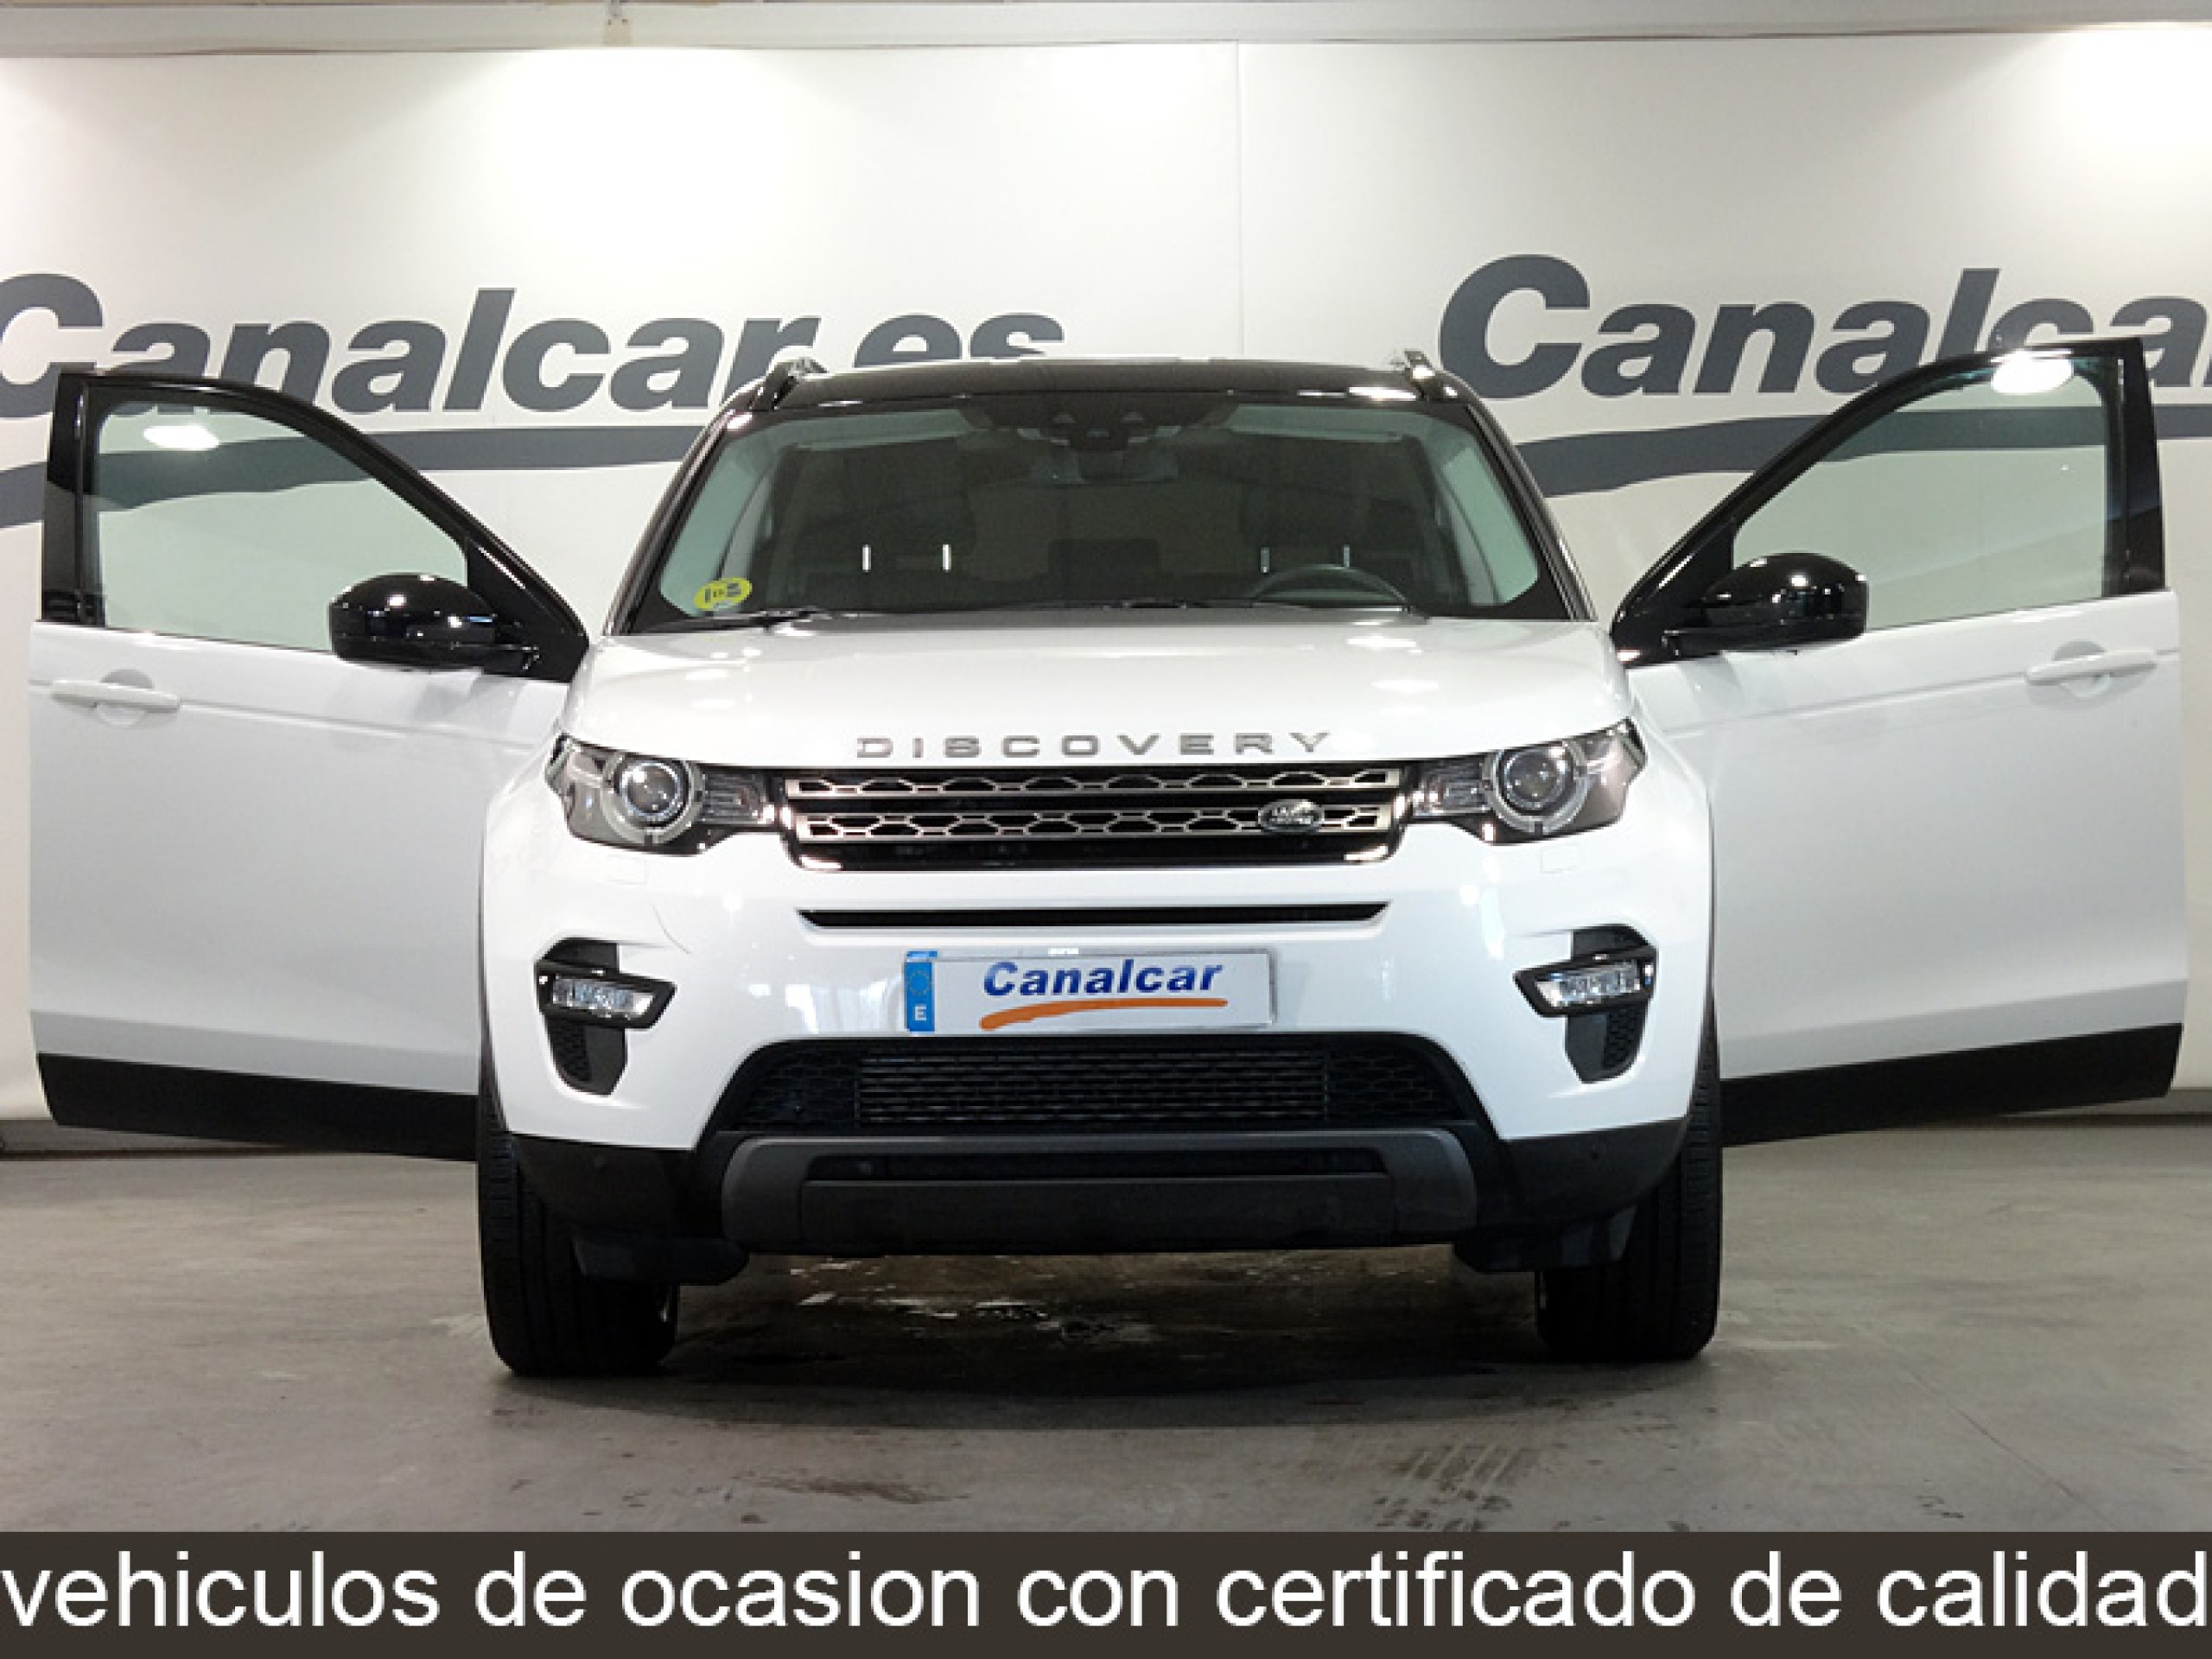 Foto Land Rover Discovery 4